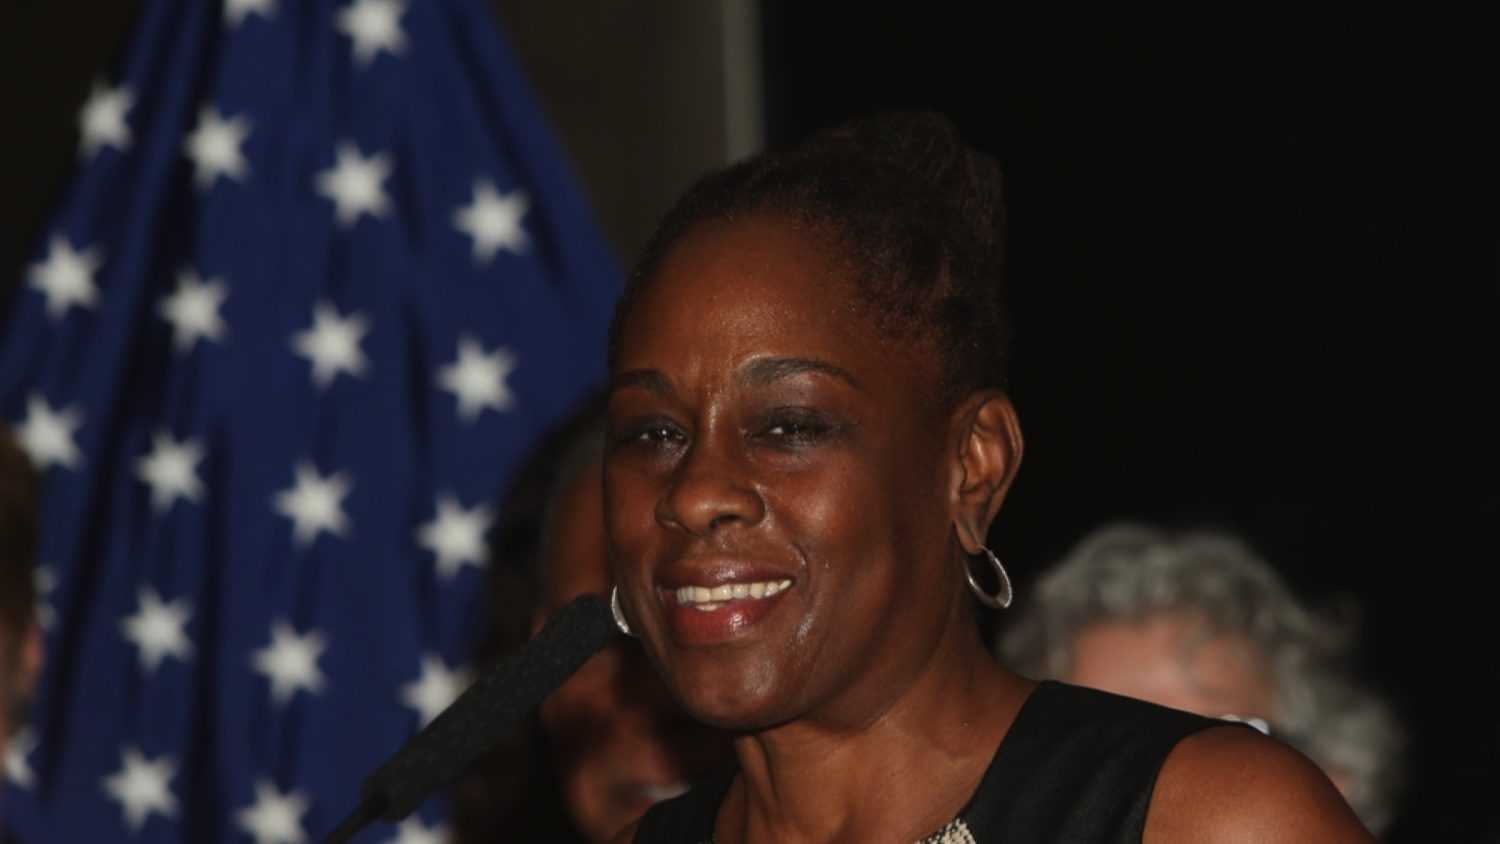 NEW YORK CITY - FEBRUARY 23 2017: Mayor de Blasio & Chirlane McCray presided over a celebration of Black History Month at the American Museum of Natural History. NYC first lady Chirlane McCray